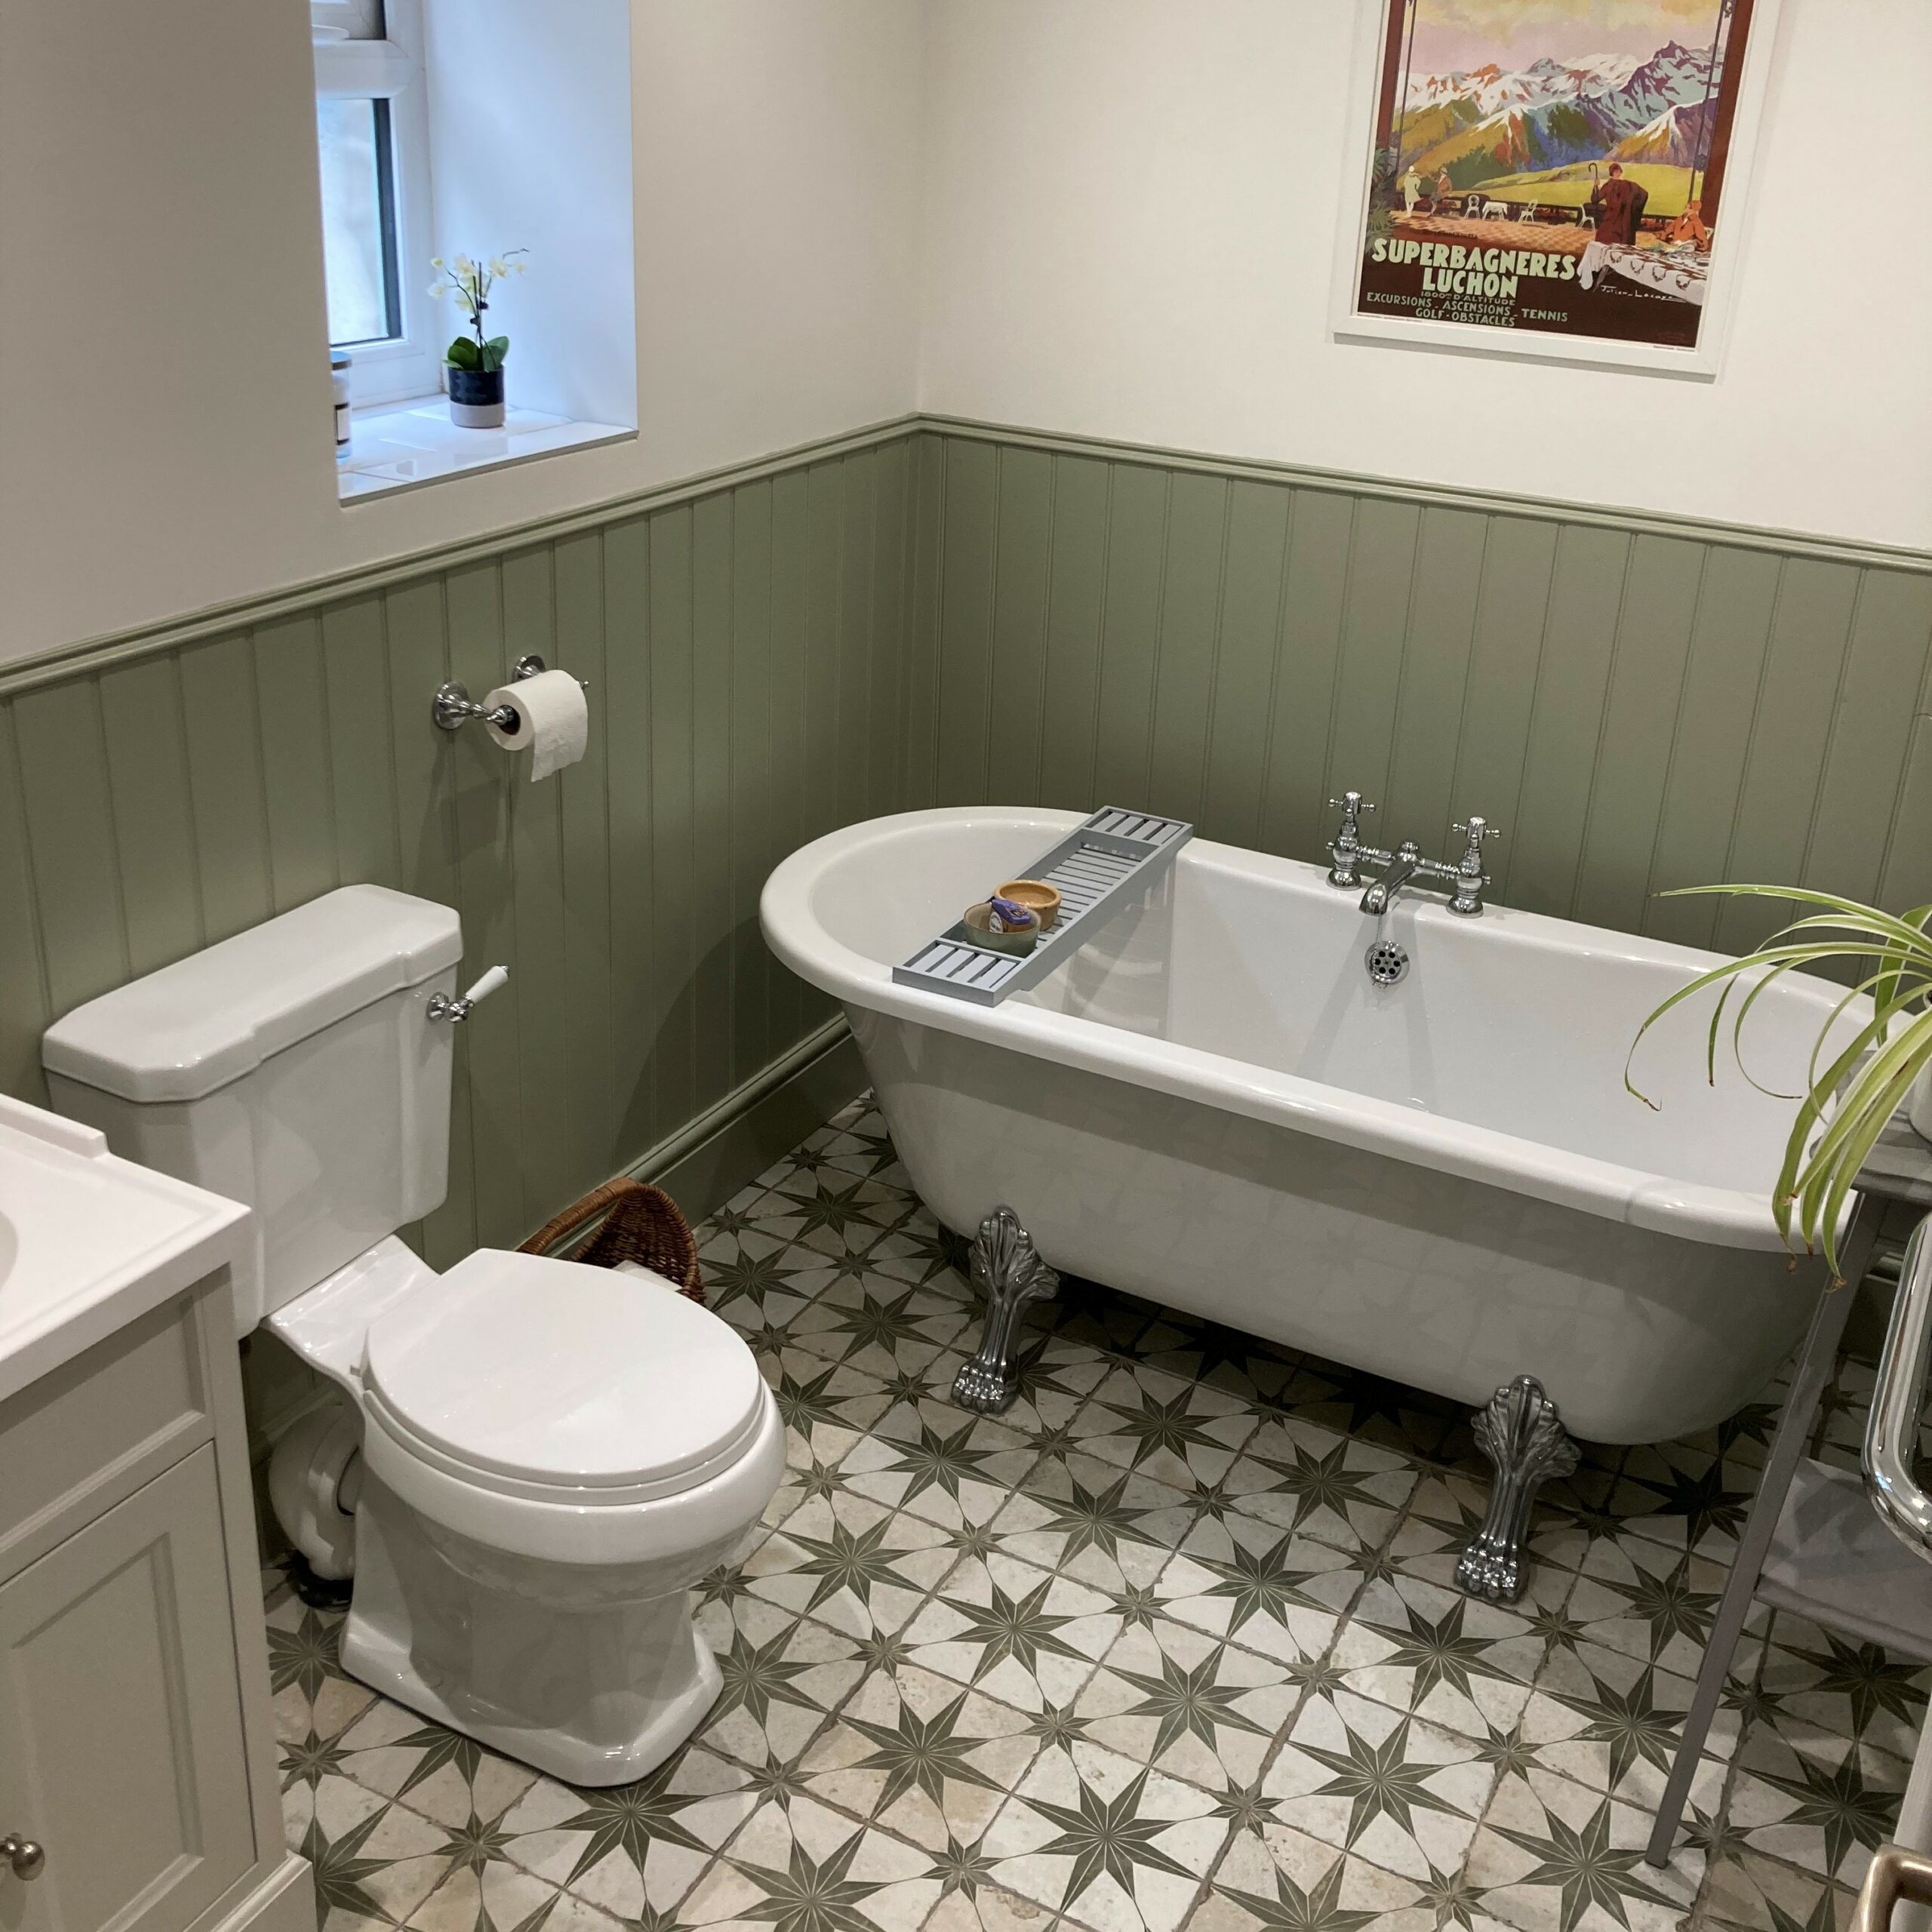 Kelly Used our Scintilla Star Pattern Tiles to Create a Charming Statement in her Bathroom